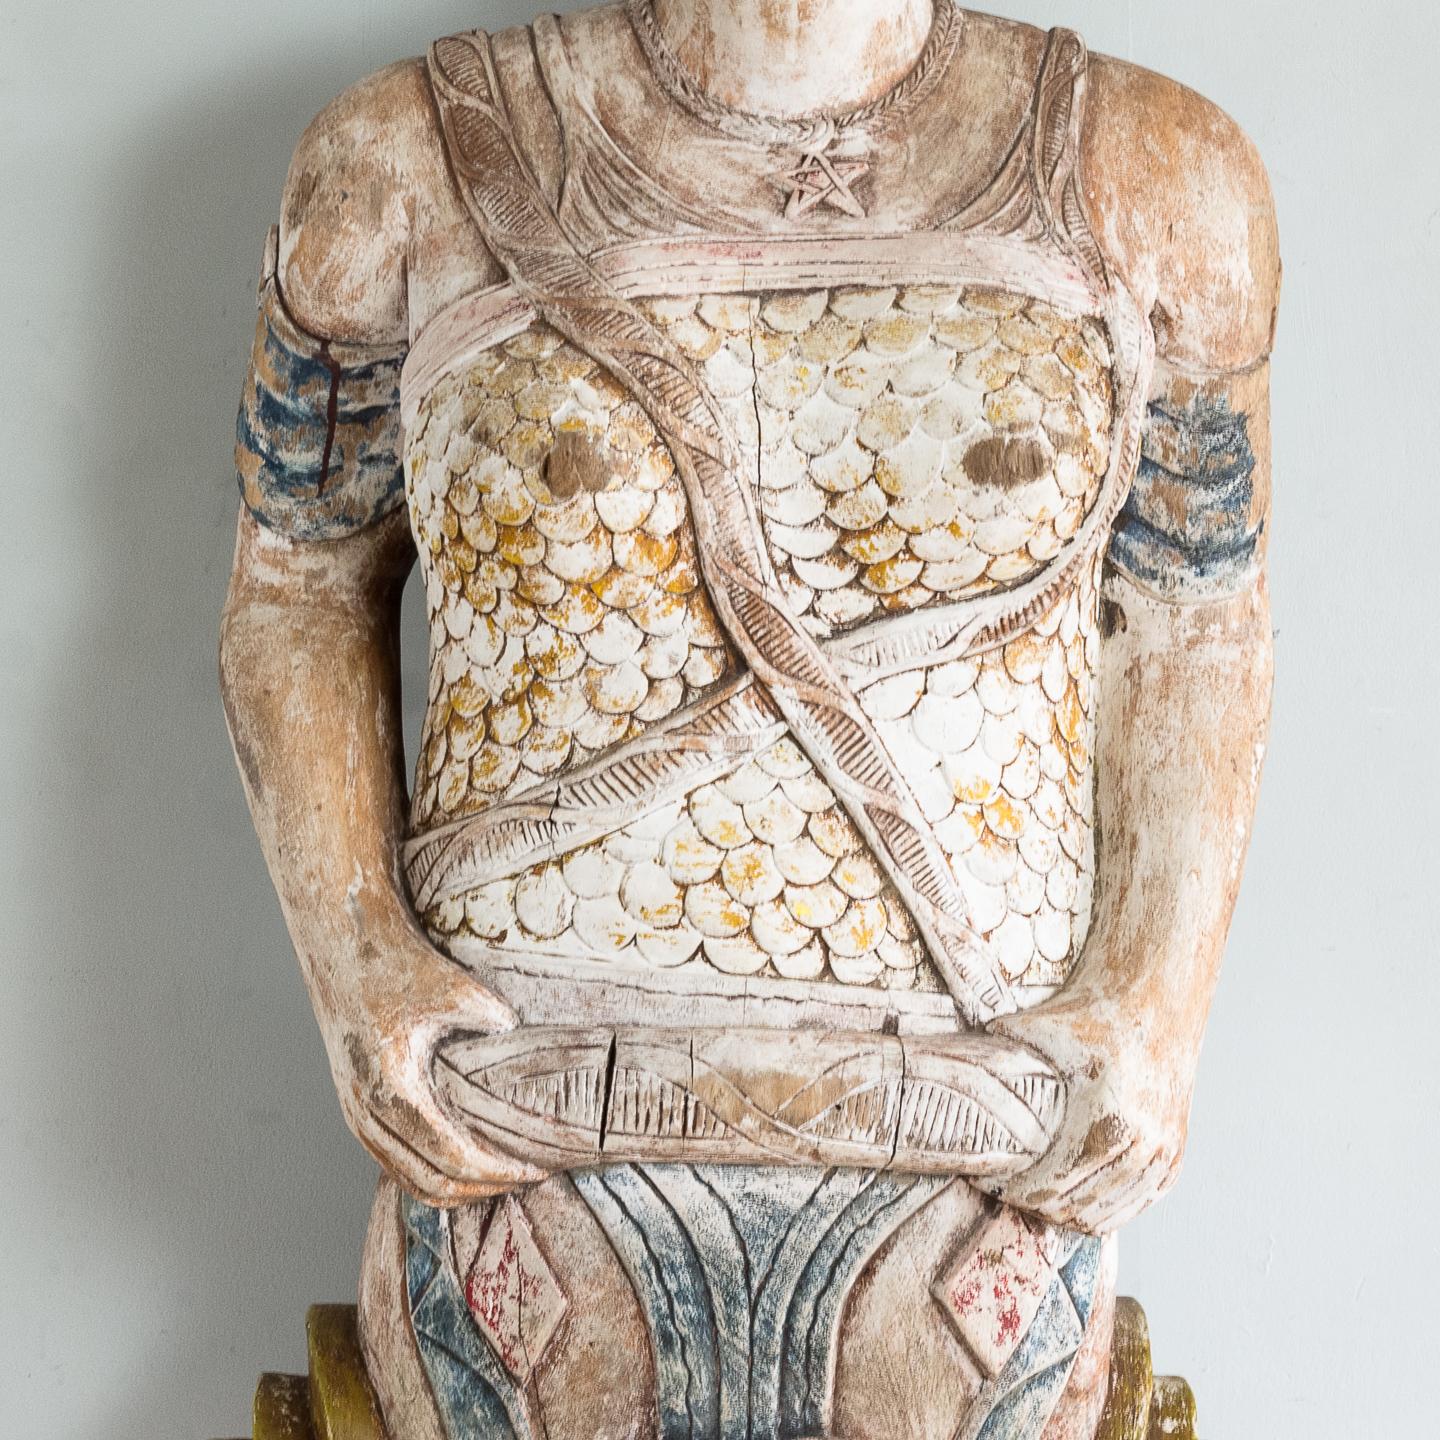 An early 20th century English carved figurehead of Queen Boudica, with remnants of old polychromatic painted decoration, removed from a London Dockside pub.